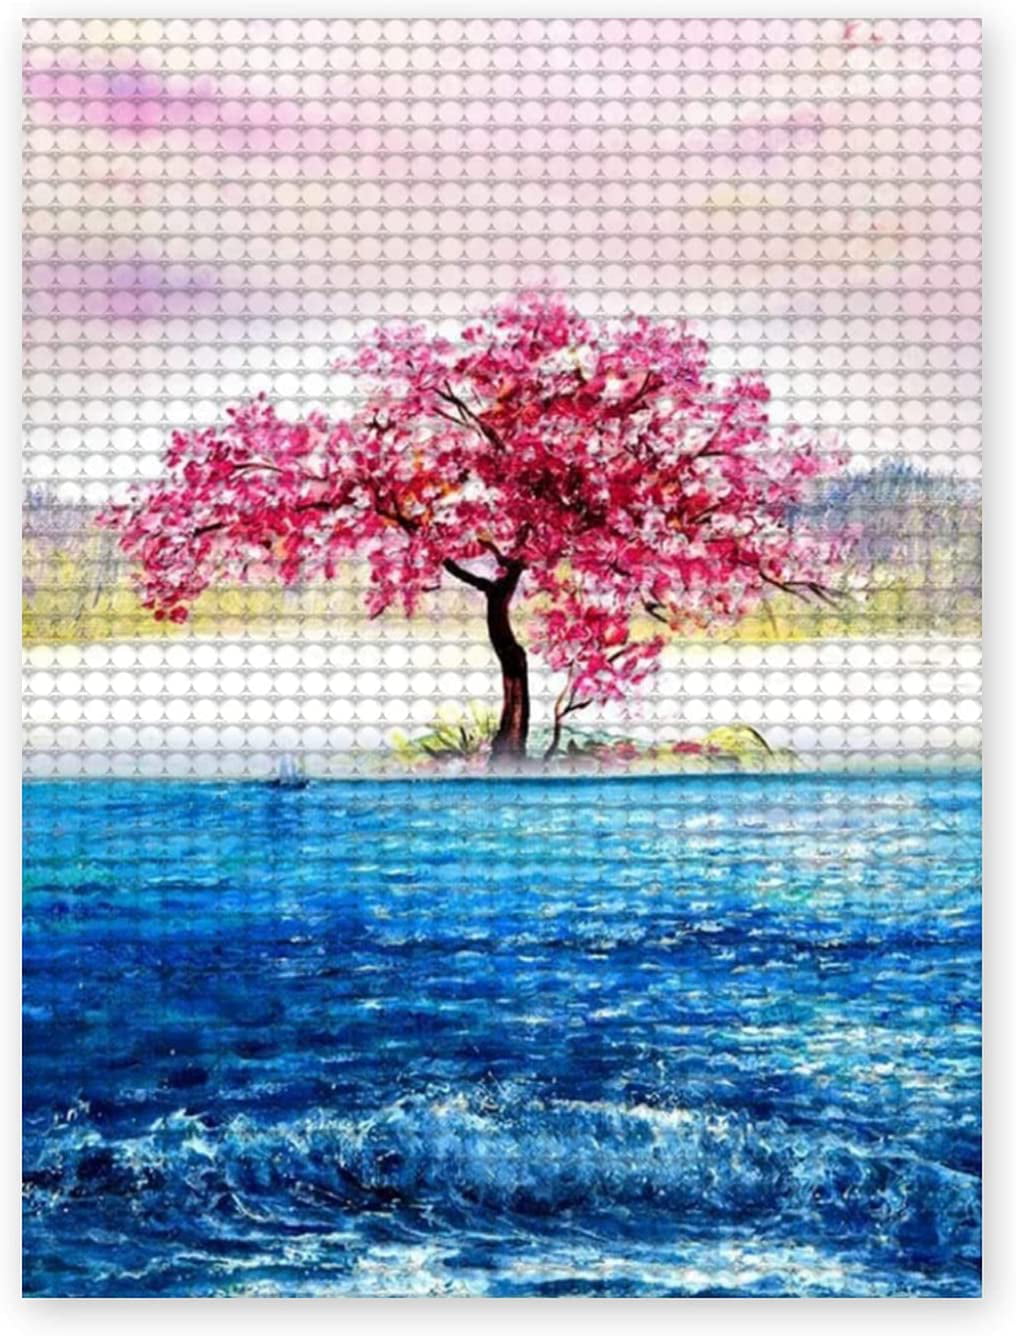 Diamond Painting Kits for Adults Full Drill 20X24 Embroidery Kits with Diamonds for Home Arts Wall Decor Mermaid Girl 50X60 cm 